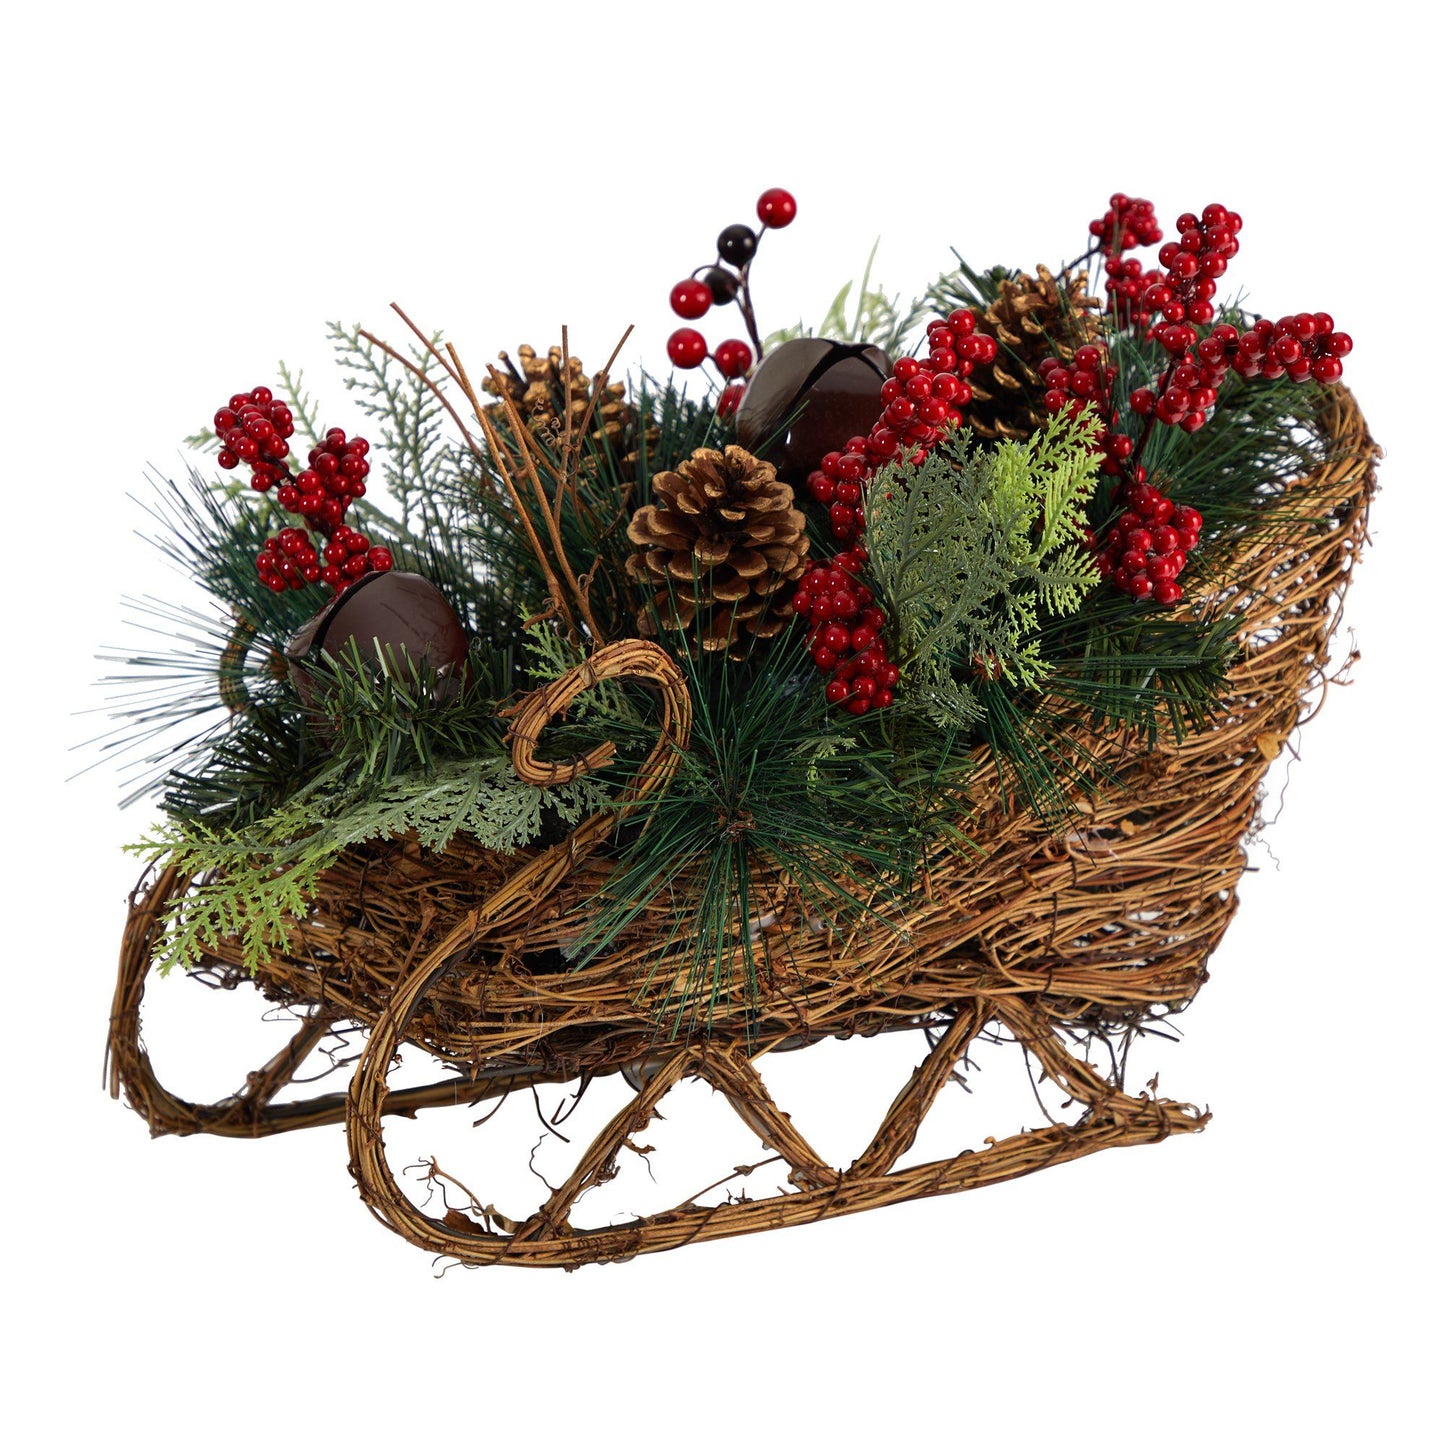 18” Christmas Sleigh with Pine, Pinecones and Berries Artificial Christmas Arrangement by Nearly Natural